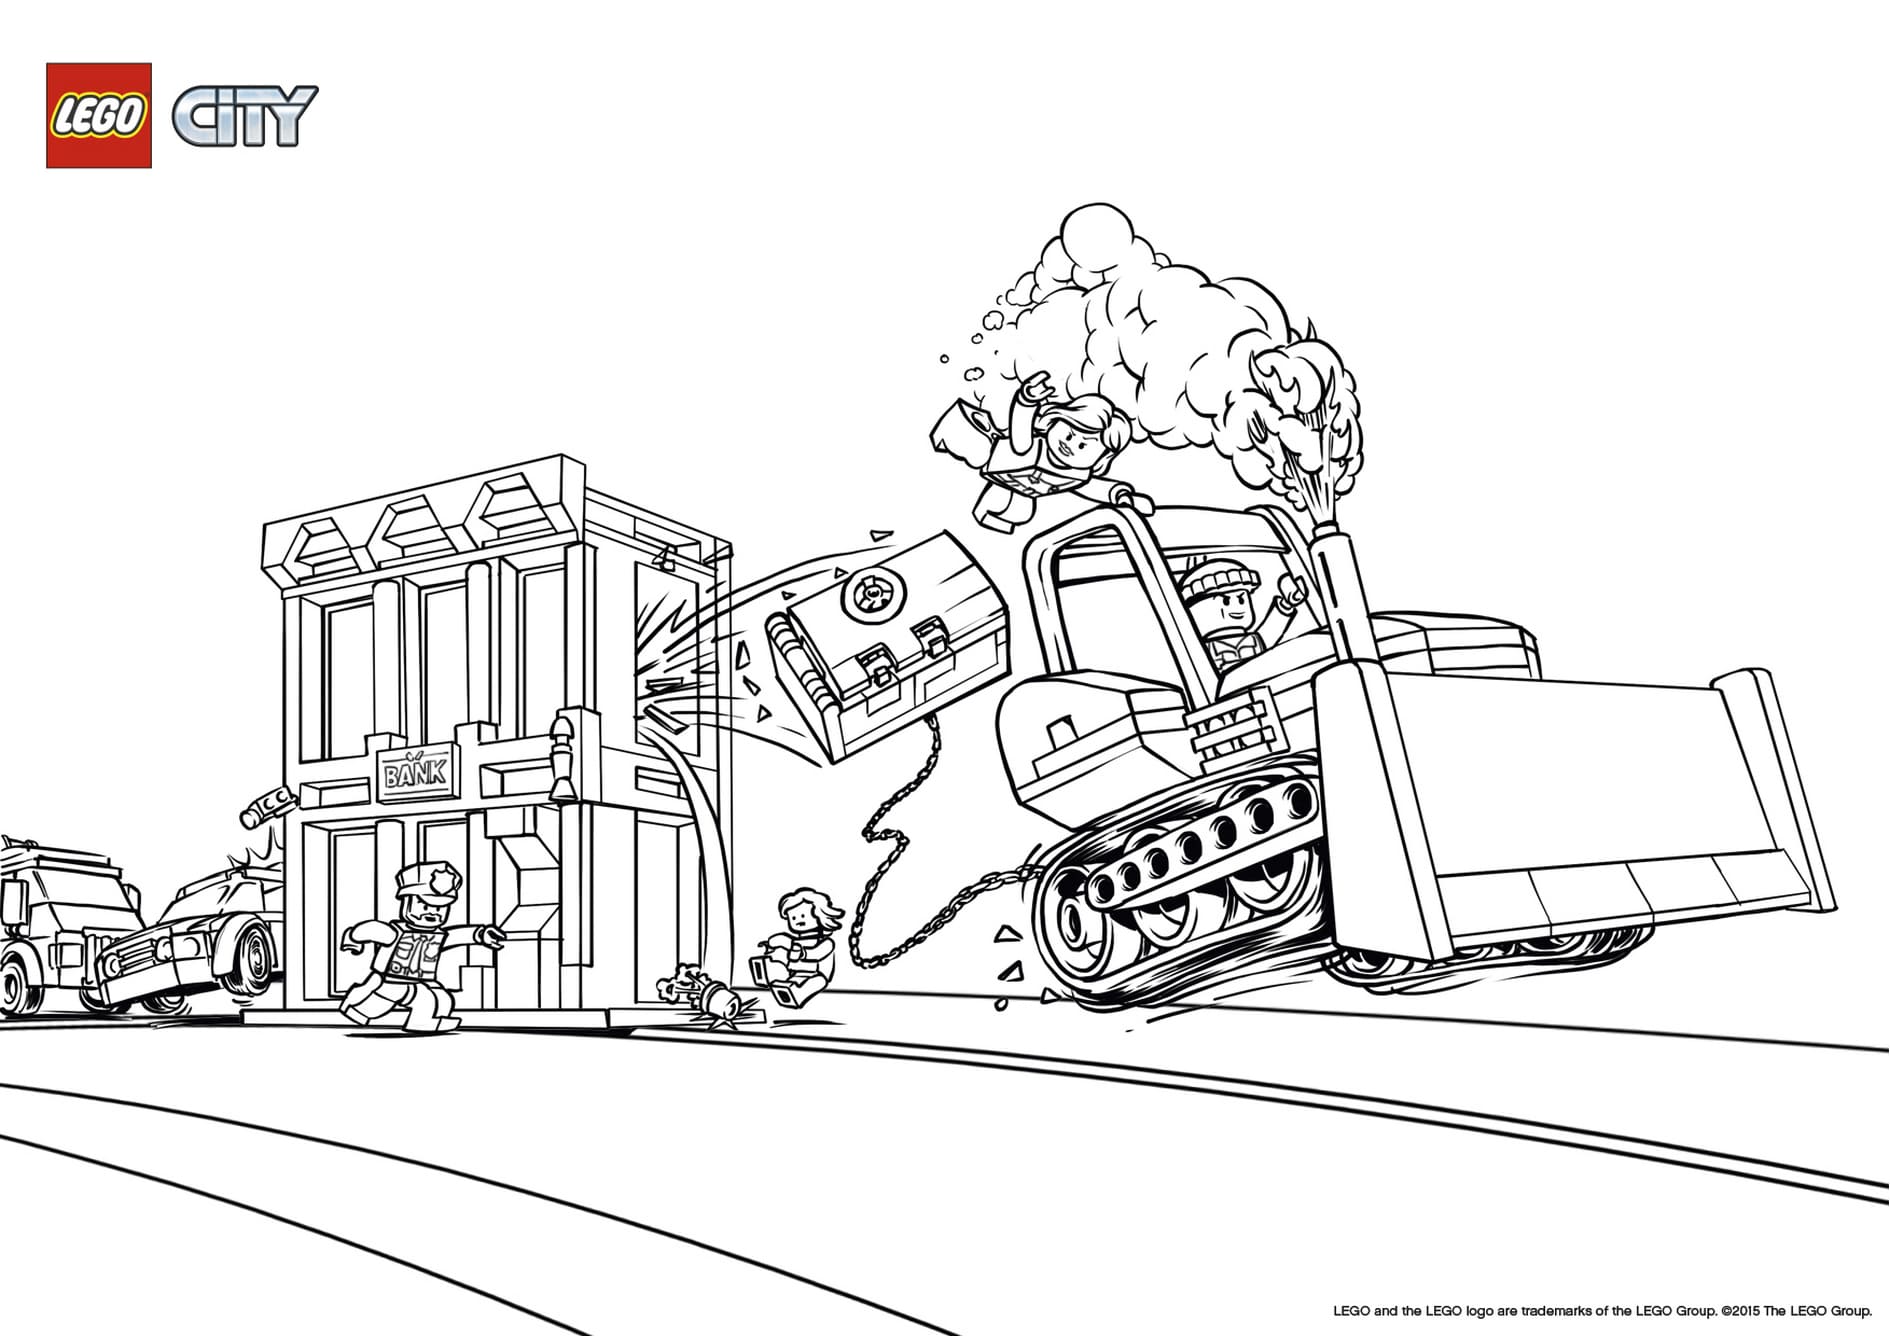 Lego City coloring pages. Free coloring pages